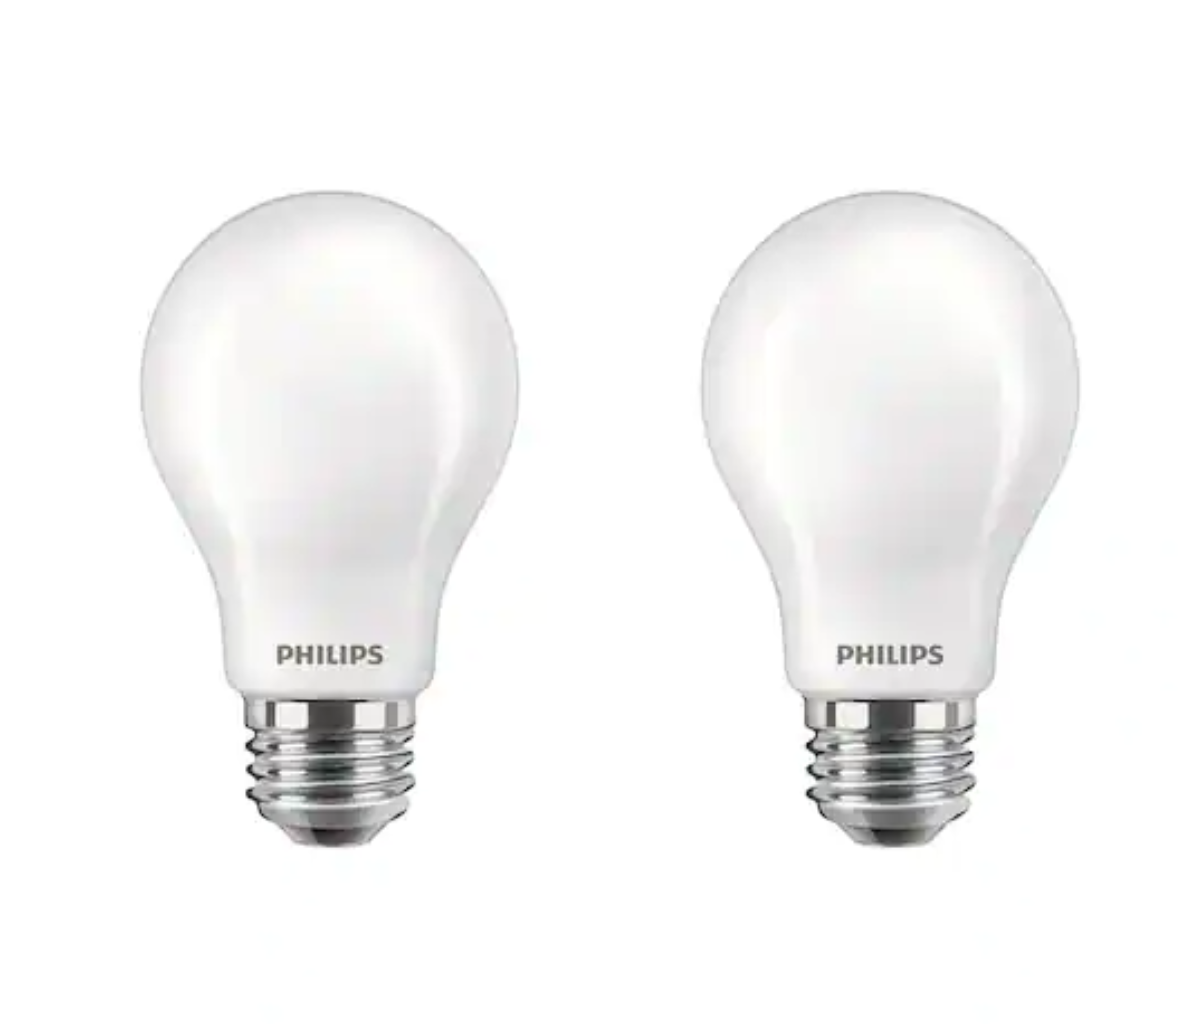 Philips 40-Watt Equivalent A19 Dimmable with Warm Glow Dimming Effect Energy Saving LED Light Bulb Soft White 2700K 2 Pack DAMAGED BOX